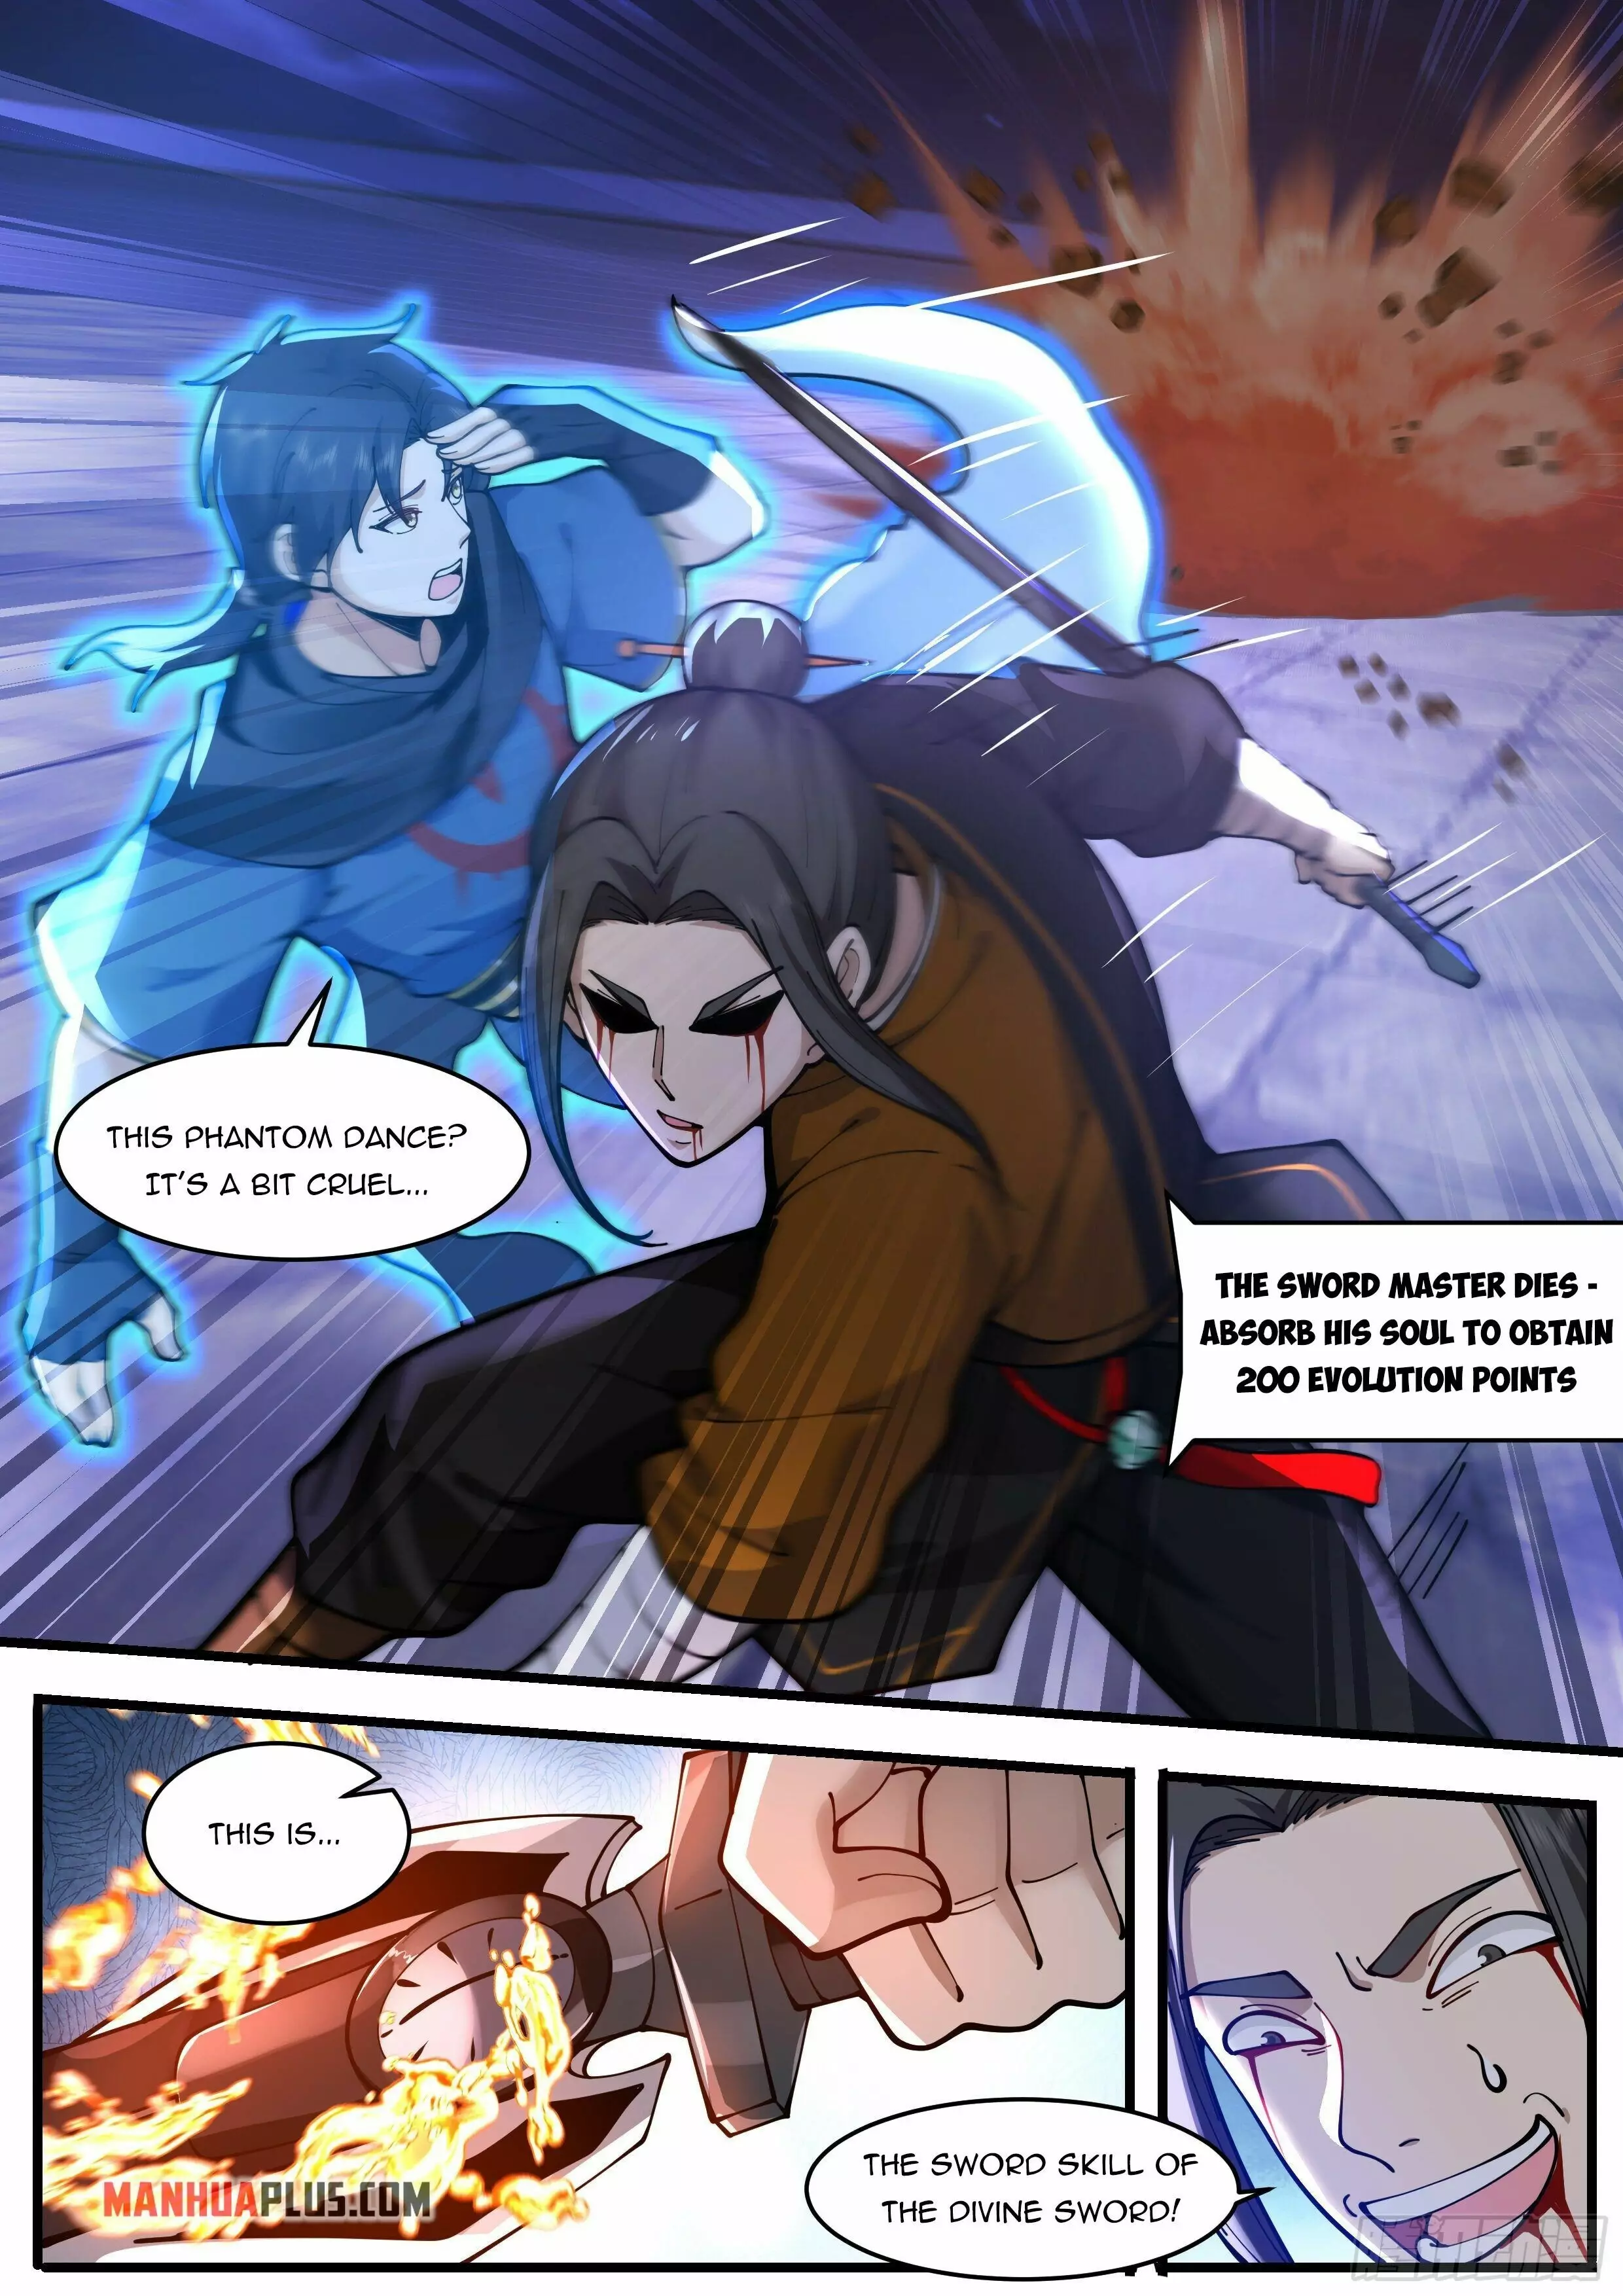 Killing Evolution From A Sword - 4 page 4-5aef6666